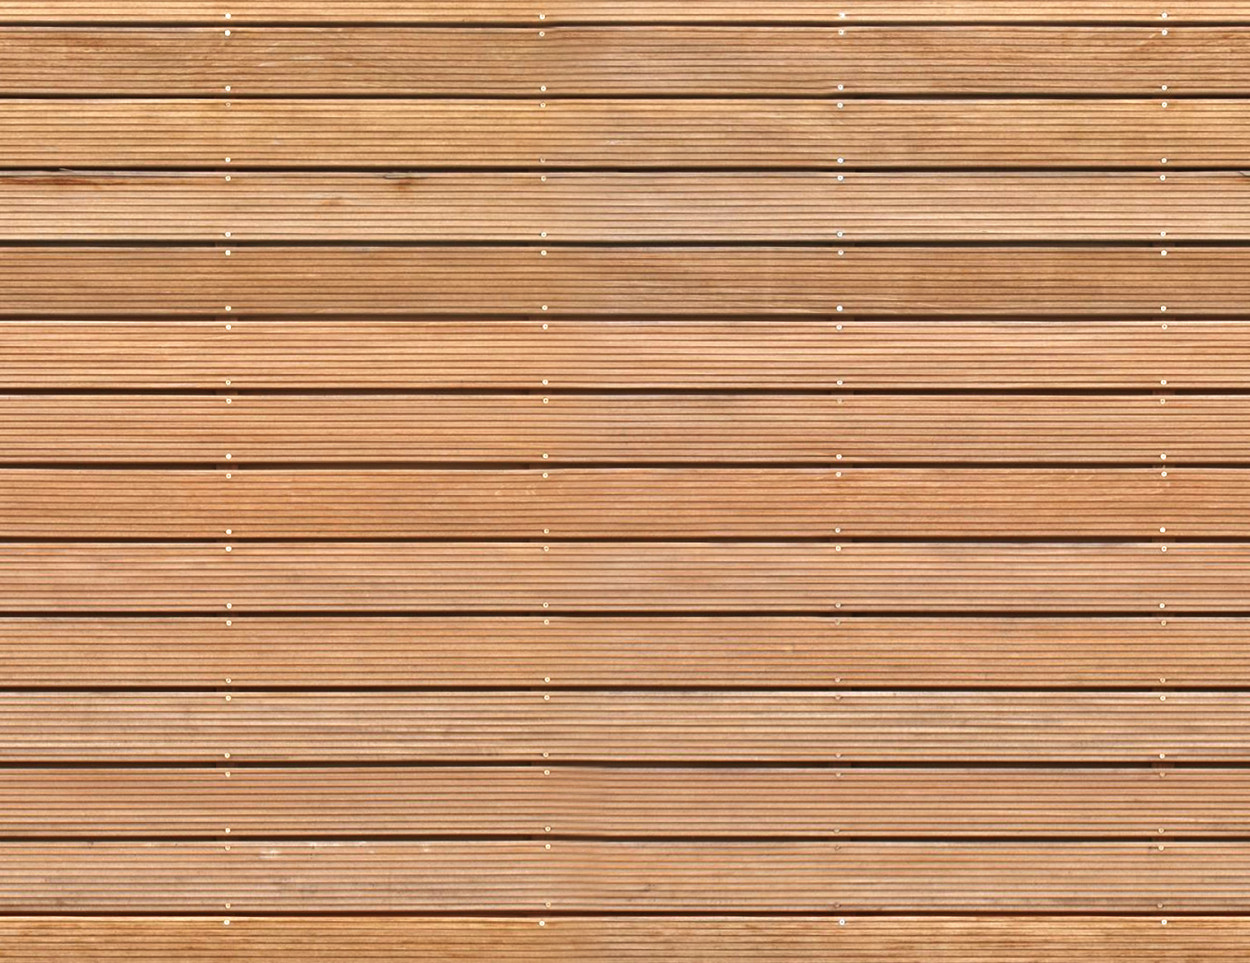 A seamless wood decking boards texture for use in architectural drawings and 3D models